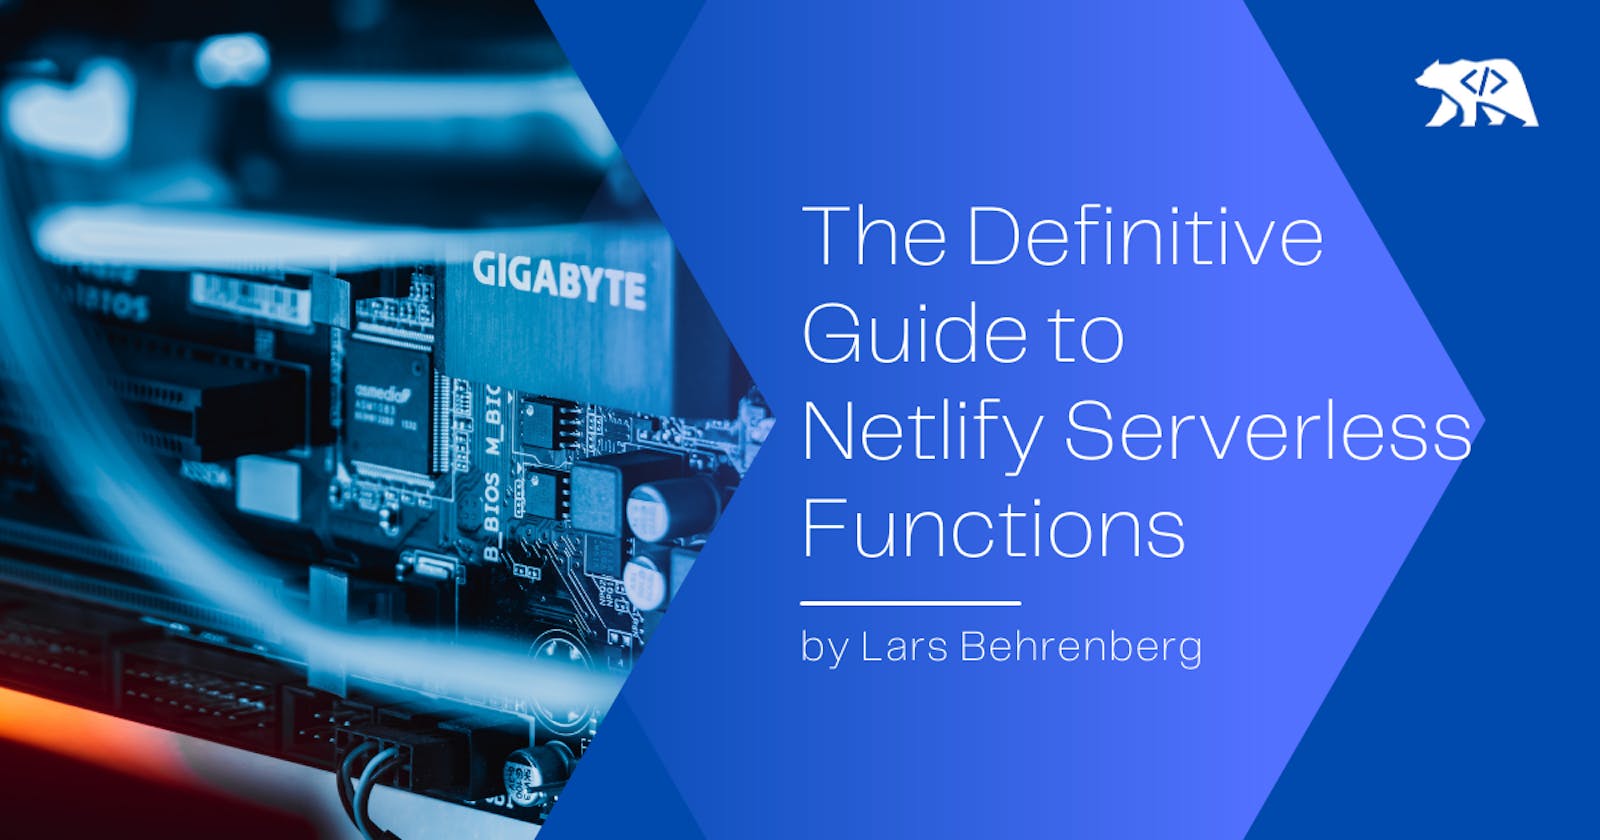 The Definitive Guide to Netlify Serverless Functions